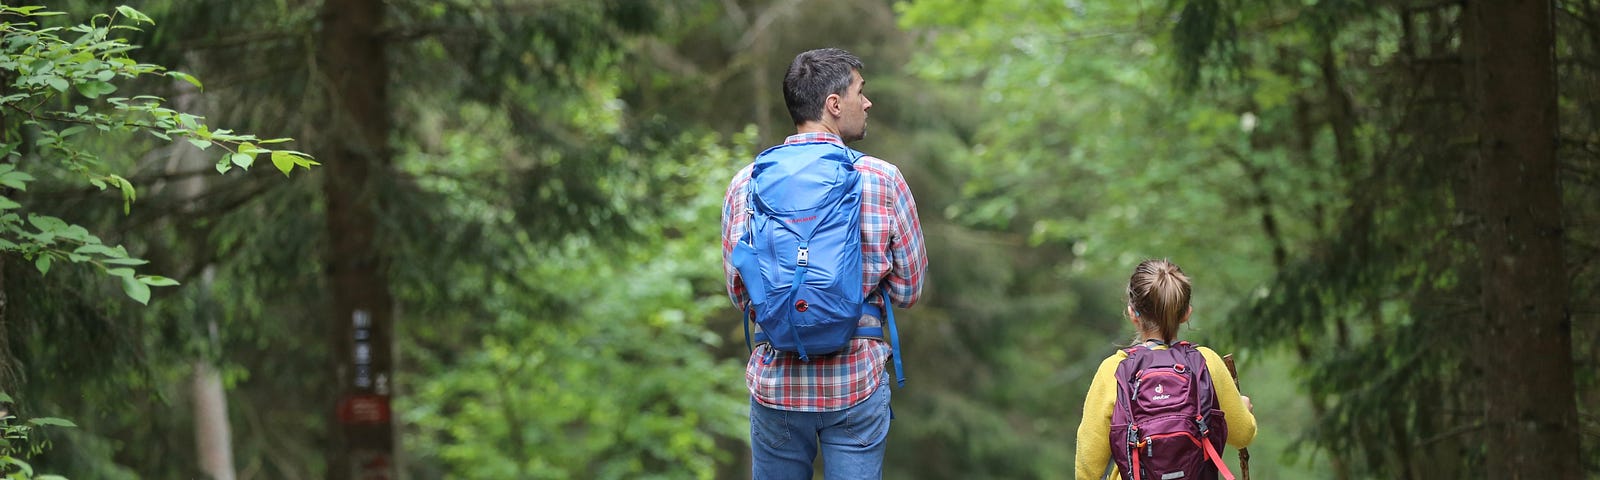 Father and daughter with backpacks beginning a hike down a wooded trail